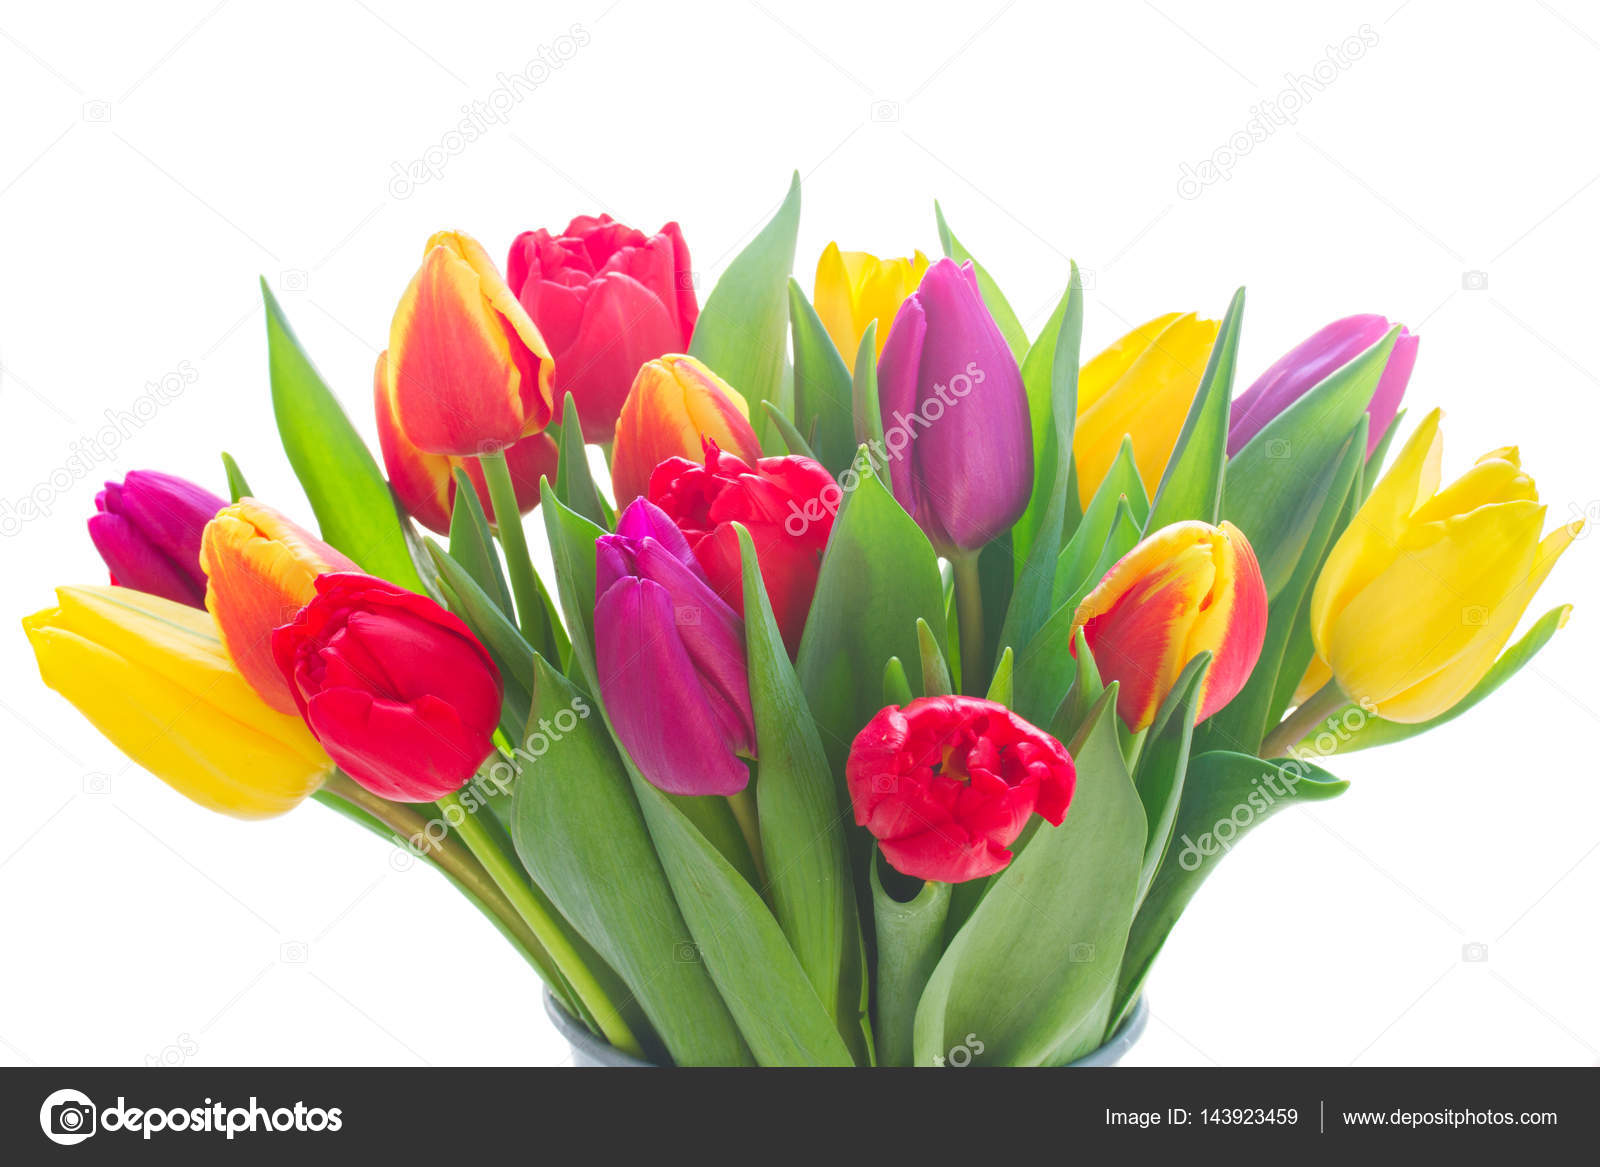 yellow and red tulip bouquet